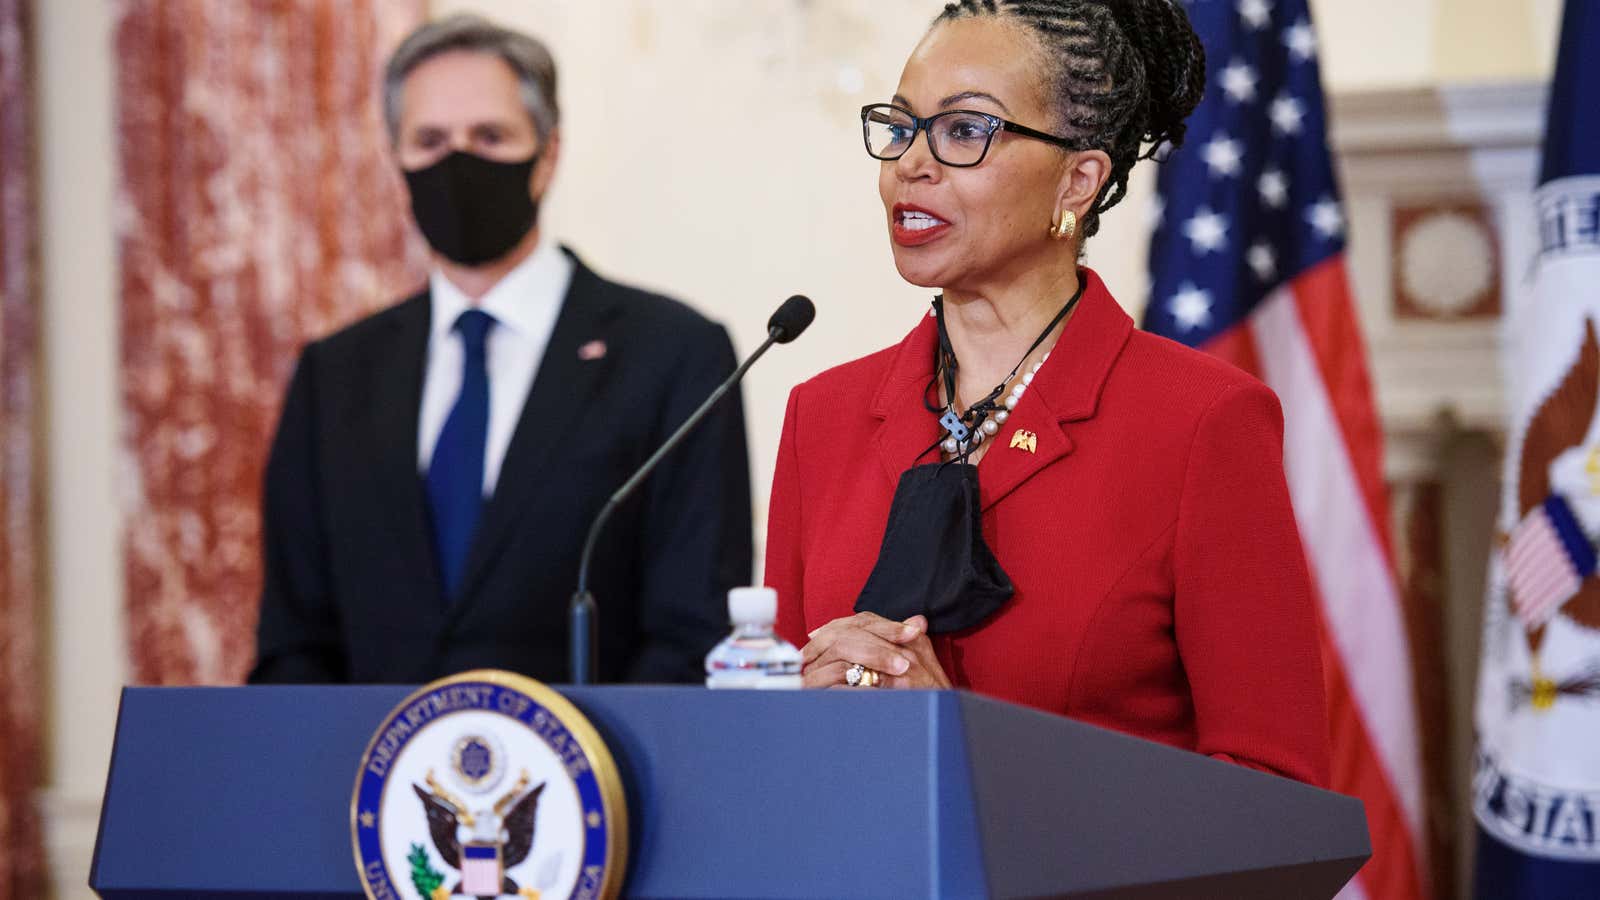 It’s not just the private sector—even the US state department named its first chief diversity officer, Gina Abercrombie-Winstanley, in April 2021.